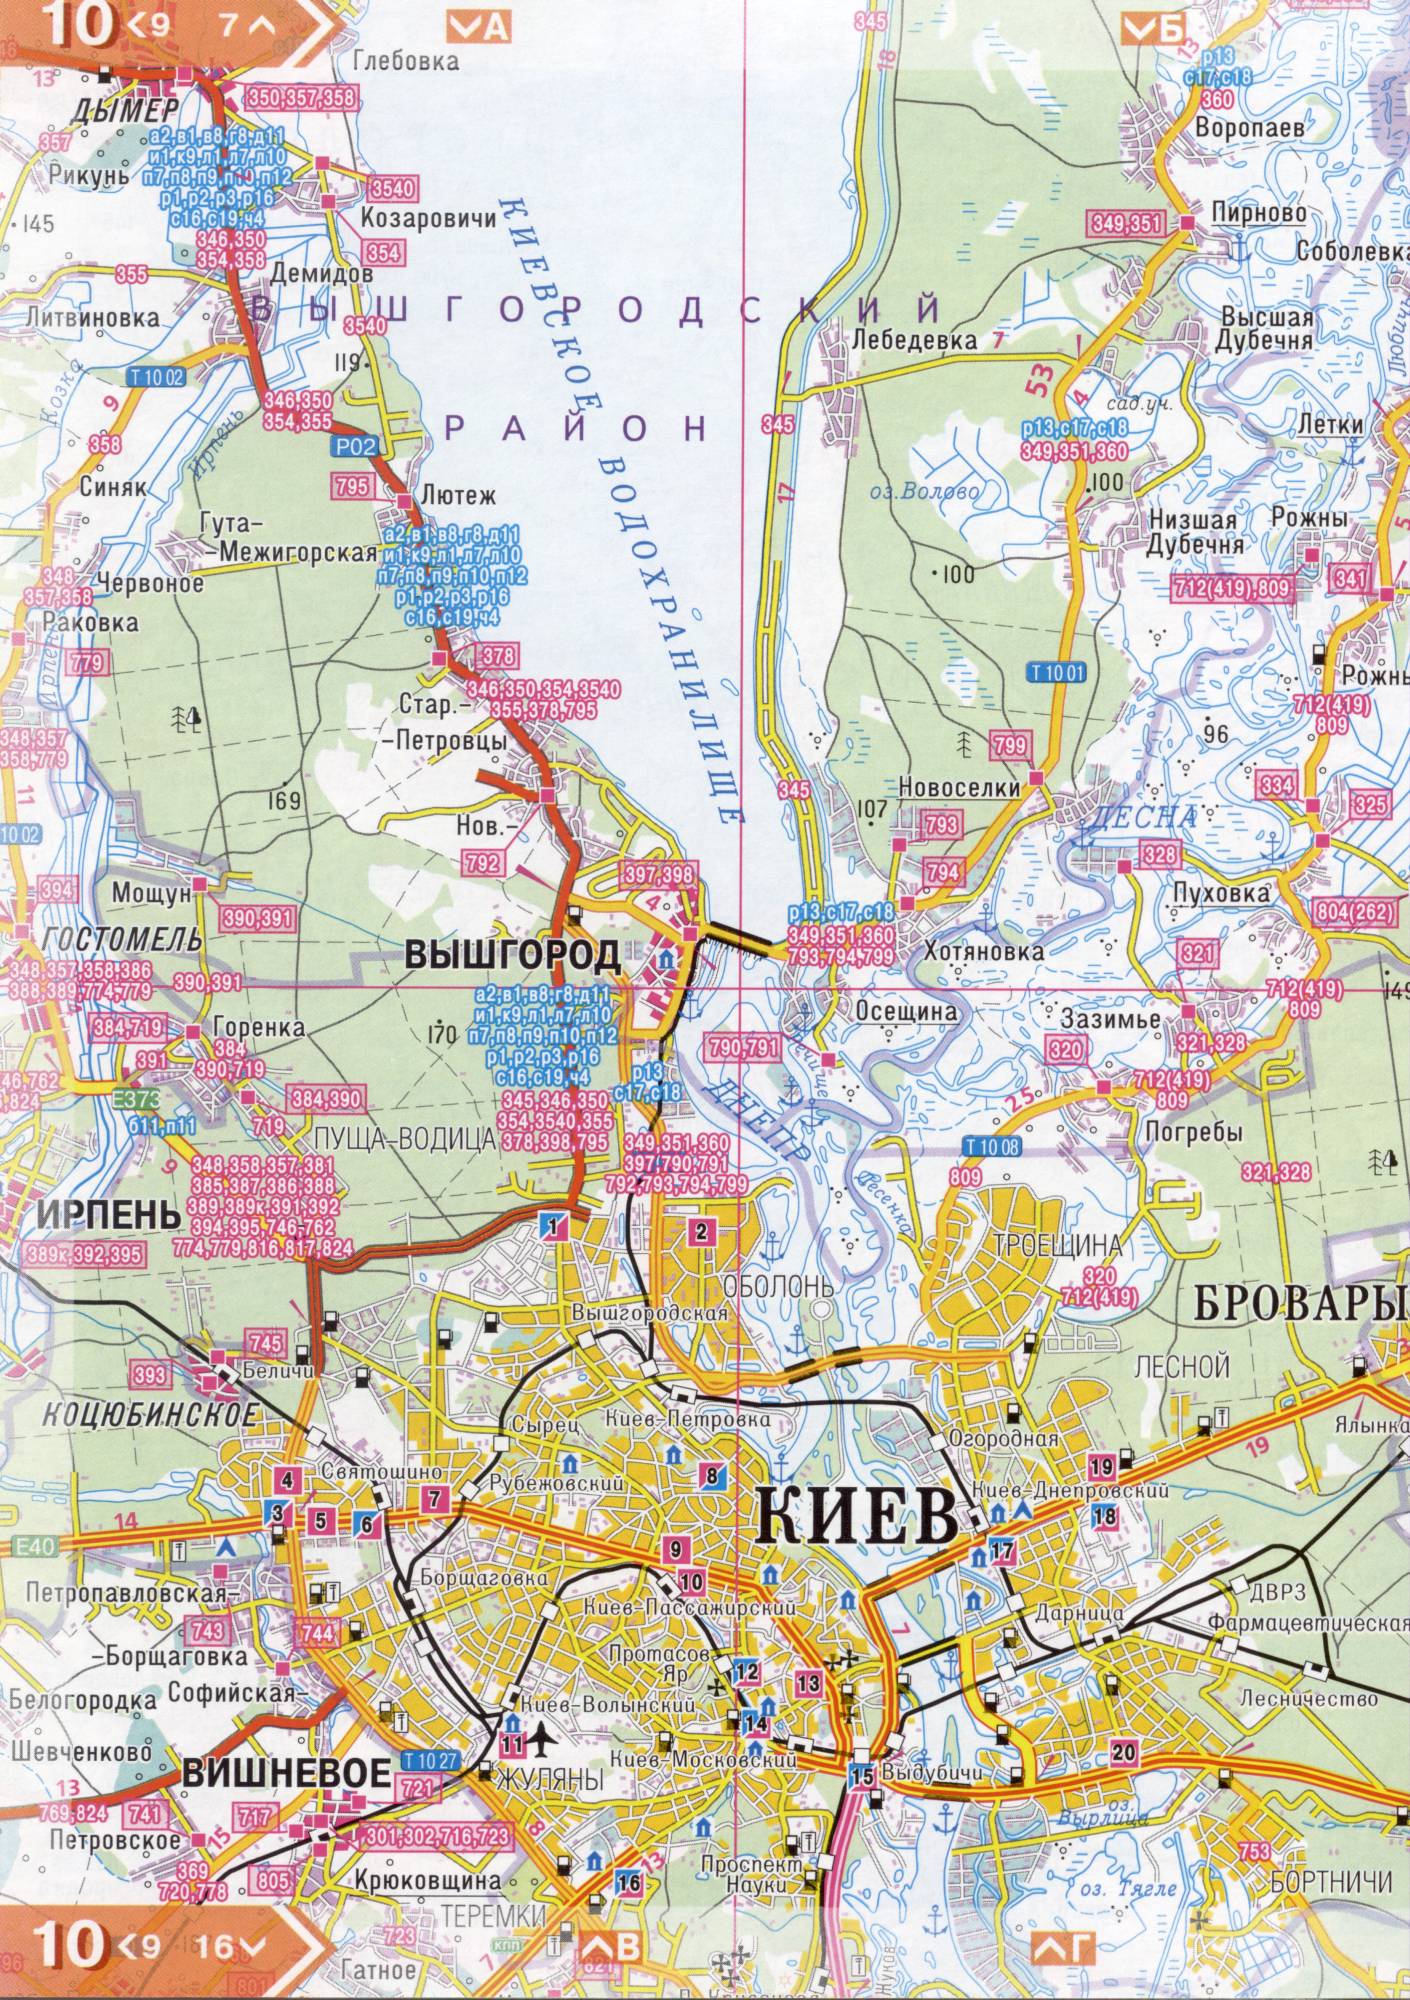 Atlas of the Kiev region. A detailed map of the Kiev region of the atlas of highways. Kyiv region on a detailed map of scale 1cm = 3km. Free, C2 - Kiev Brovary